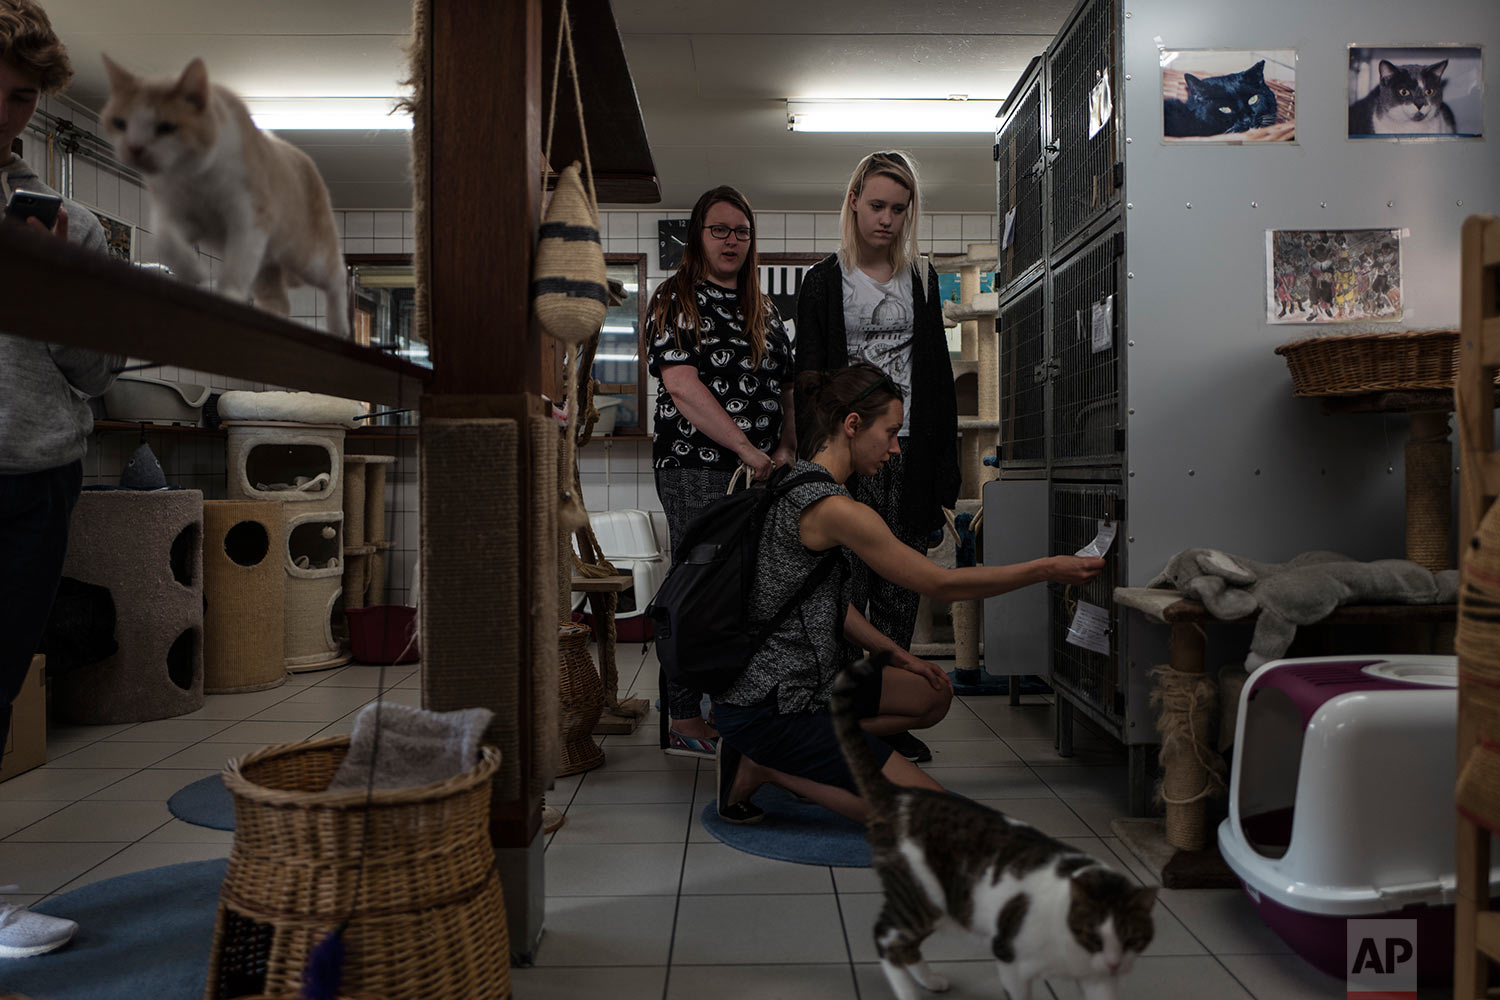  In this Thursday, Aug. 3, 2017 photo, tourists from Finland visit the Catboat shelter in Amsterdam, Netherlands. (AP Photo/Muhammed Muheisen) 